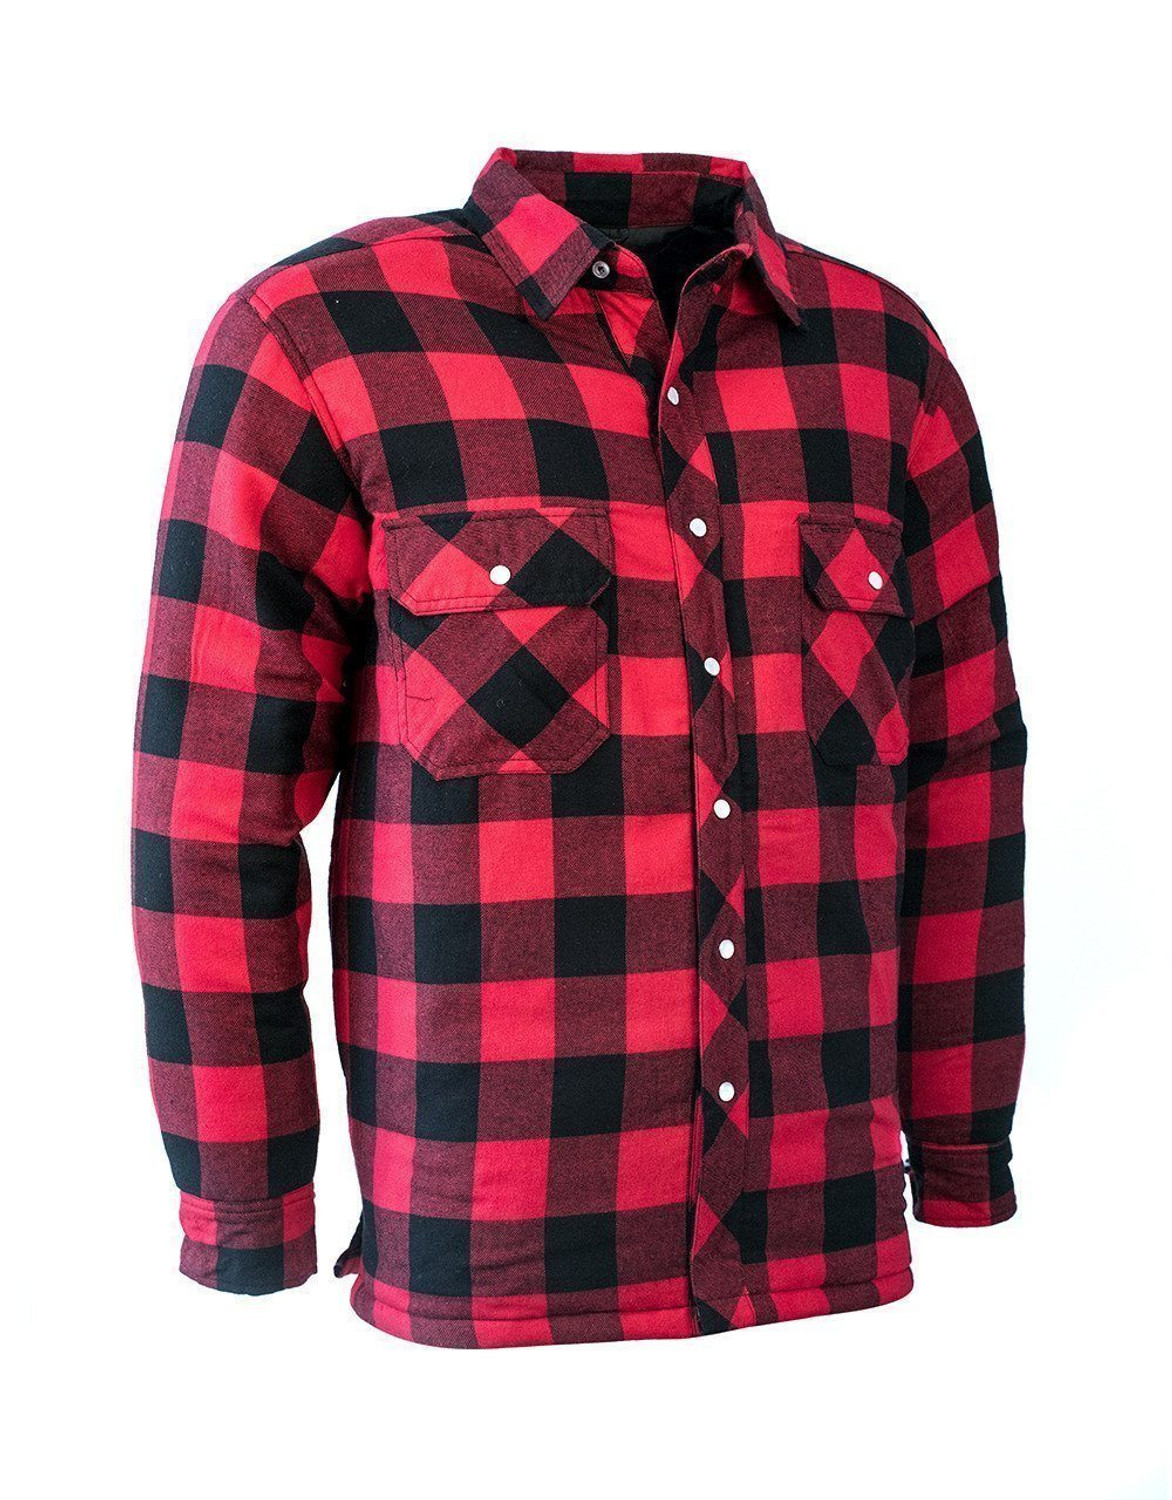 https://cdn11.bigcommerce.com/s-i9xhut37/images/stencil/1500x1500/products/455/1274/red-buffalo-plaid-quilted-flannel-shirt-safetyapparel.ca-front__63033.1655126863.jpg?c=2